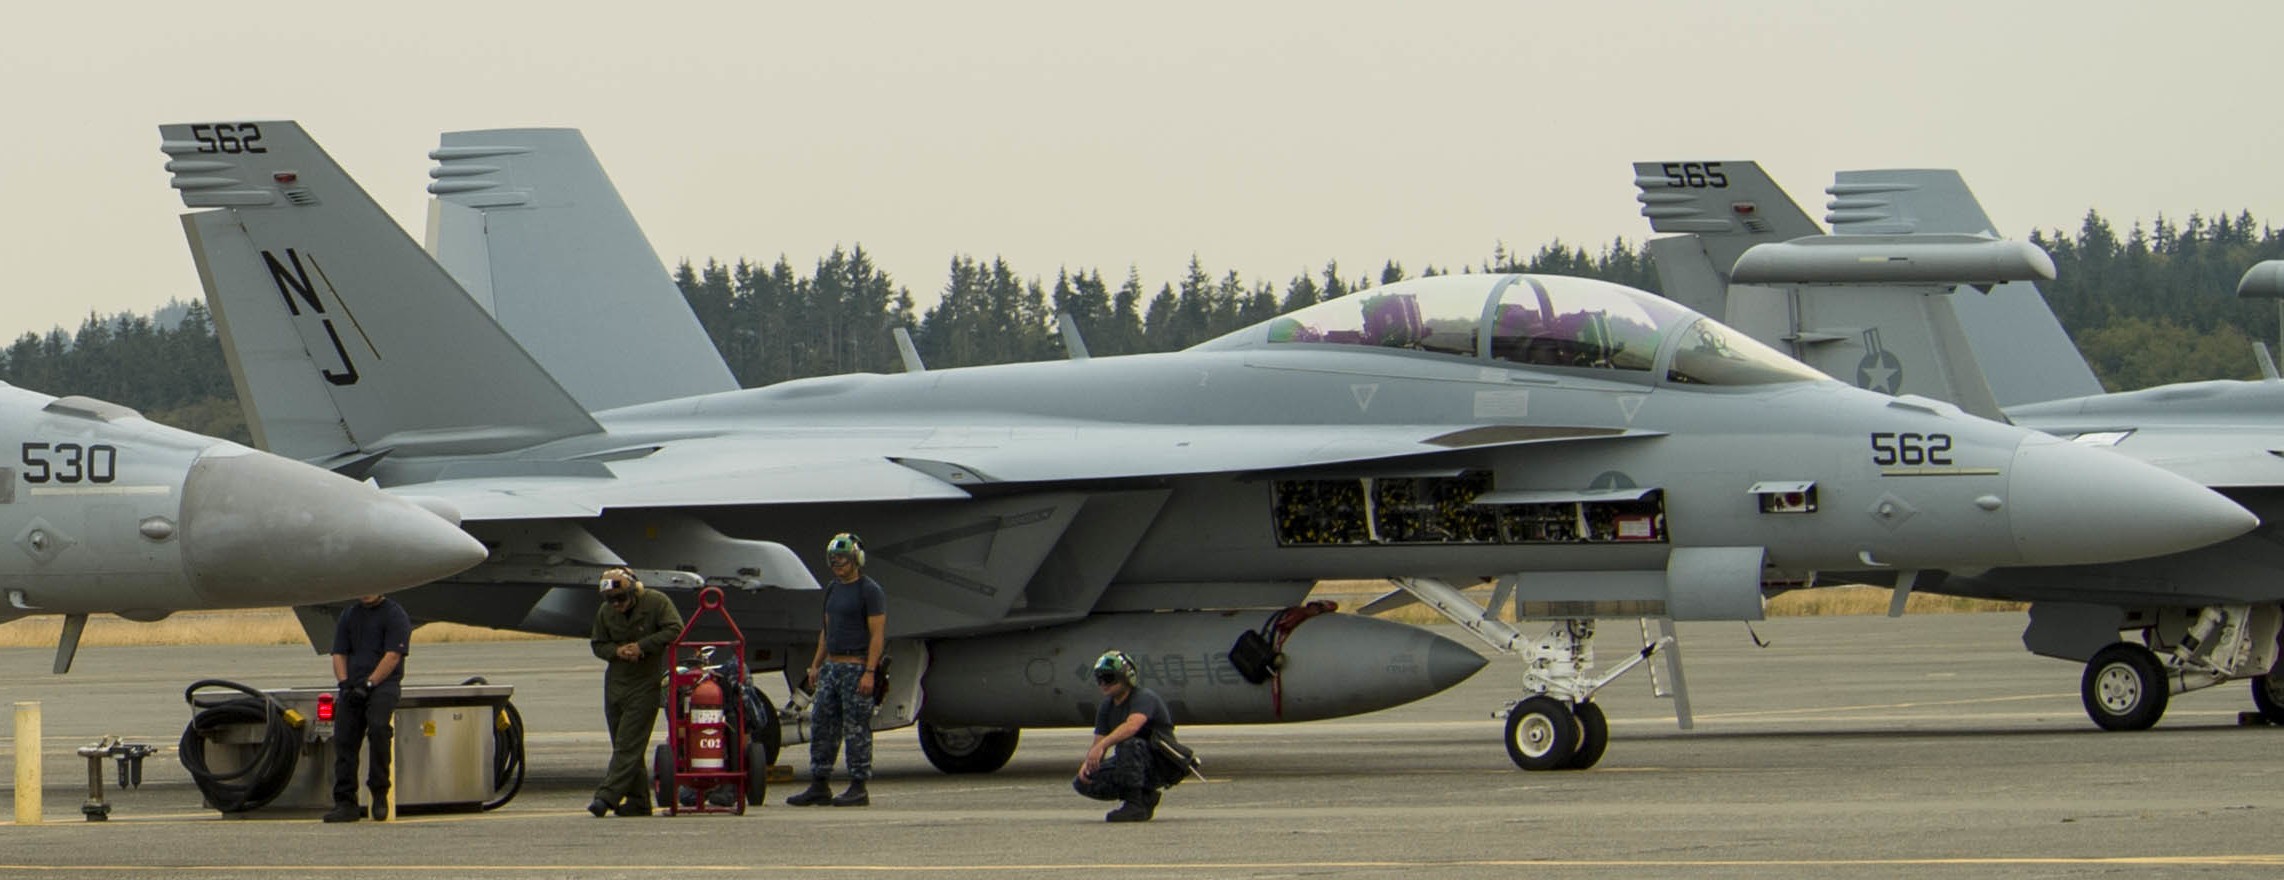 vaq-129 vikings electronic attack squadron fleet replacement frs us navy ea-18g growler 83